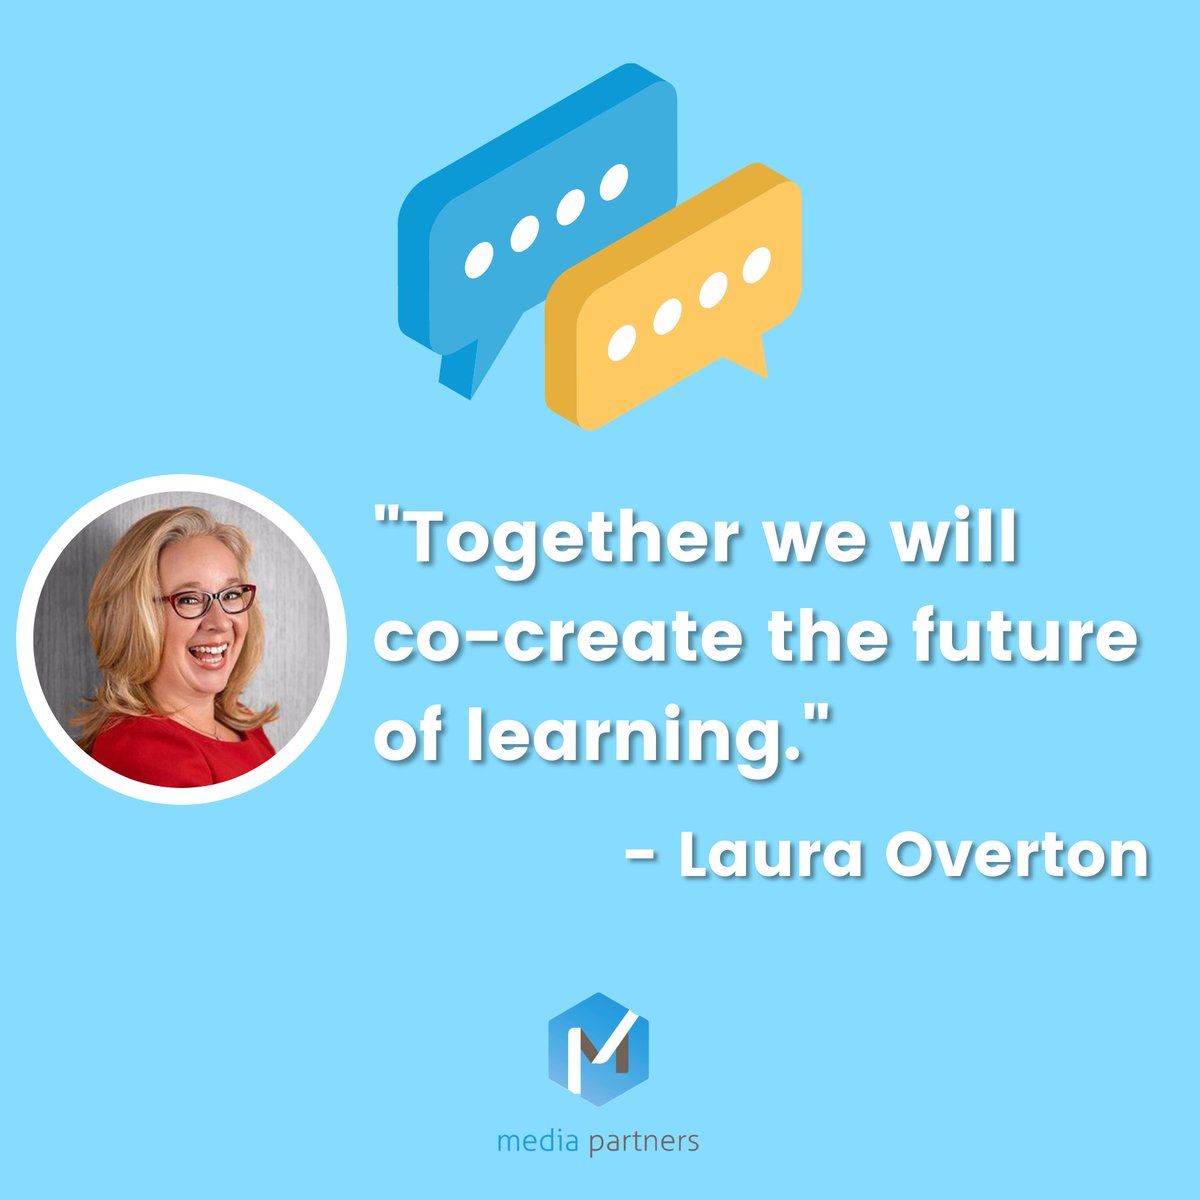 'Together we will co-create the future of learning.' Experienced international speaker, author, and facilitator @lauraoverton speaks on the utilization of a marketing mindset to unlock L&D business potential! 

#marketing #Learningchangemakers #LDMasterclass #QuipsandQuotes